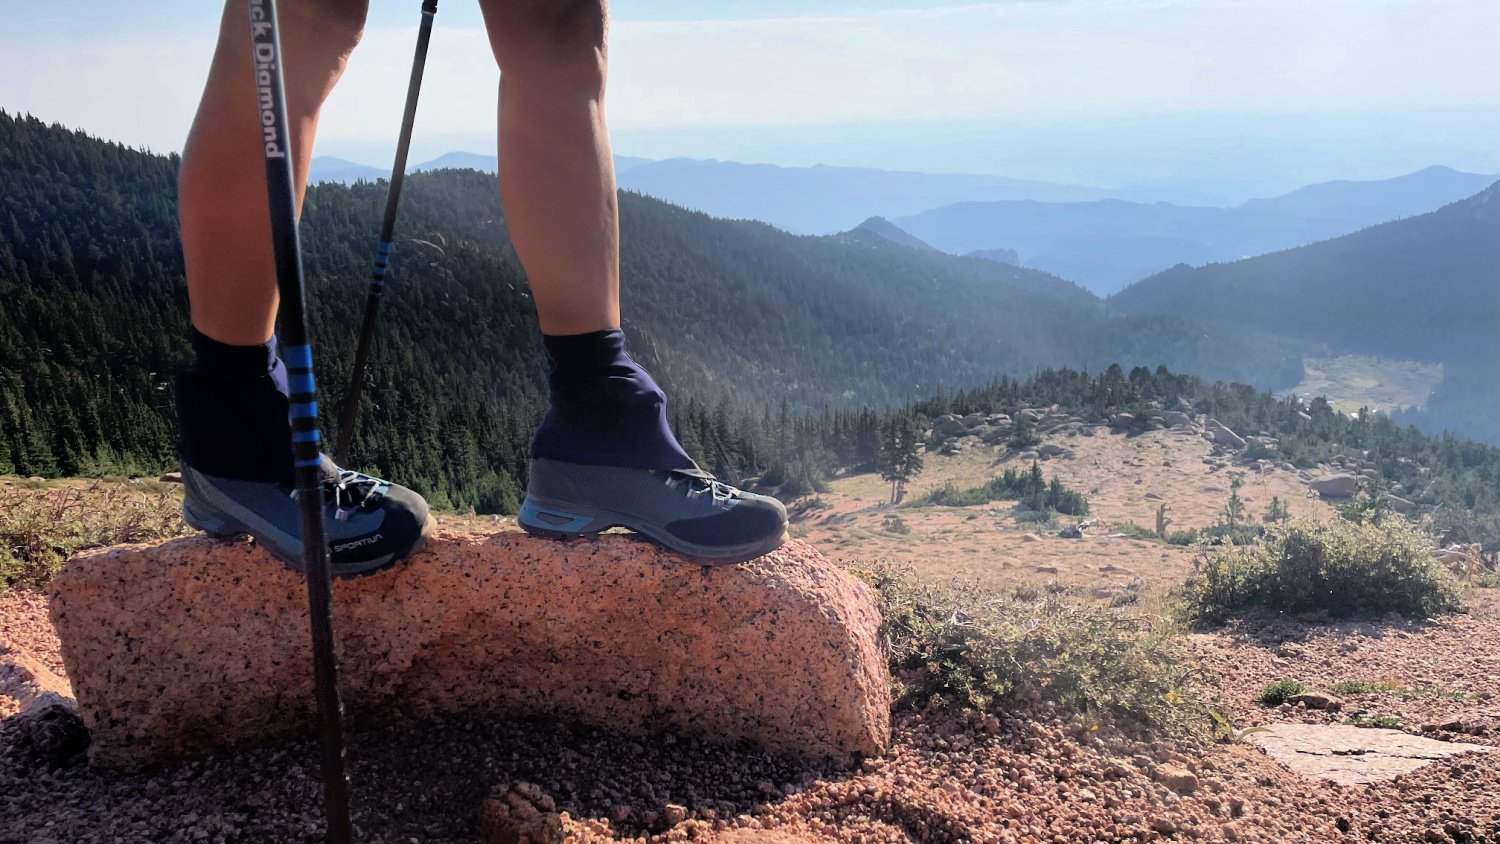 Beginner Hikers Guide to Hiking and Walking Gear - 10 Mile Hike